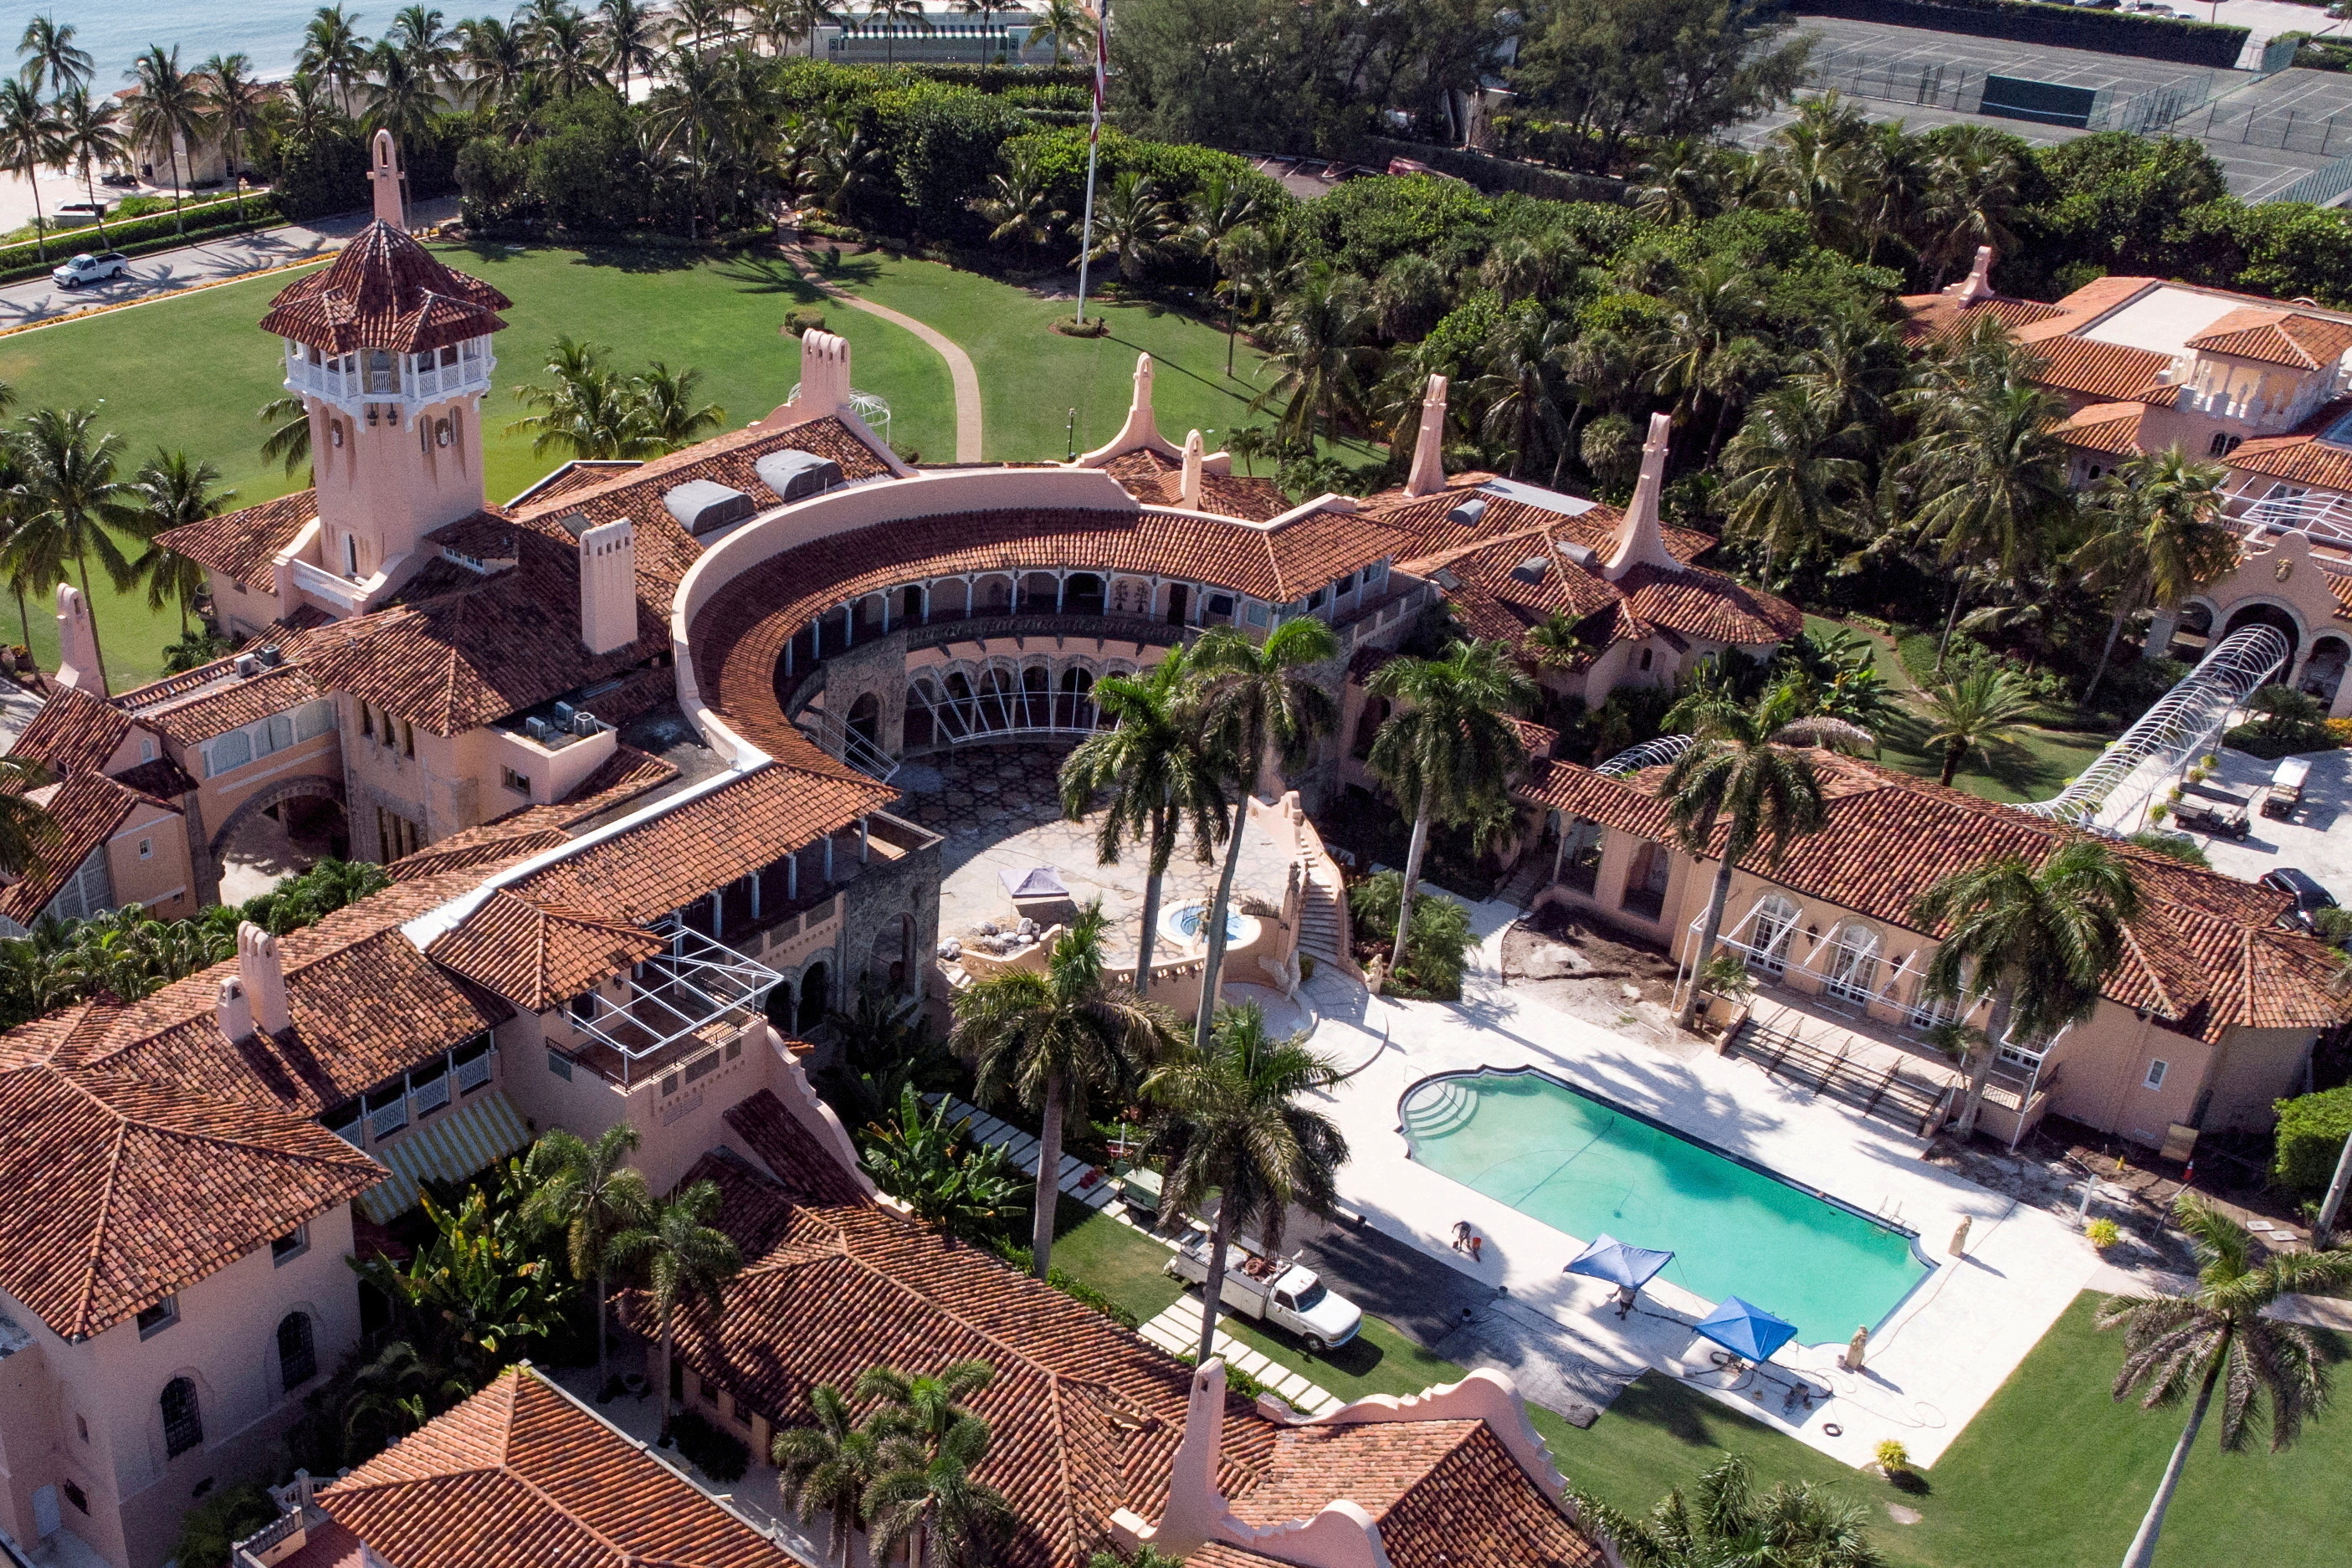 Donald Trump's Mar a Lago Estate Facts and Pictures - Mar-a-Lago History  And Photos